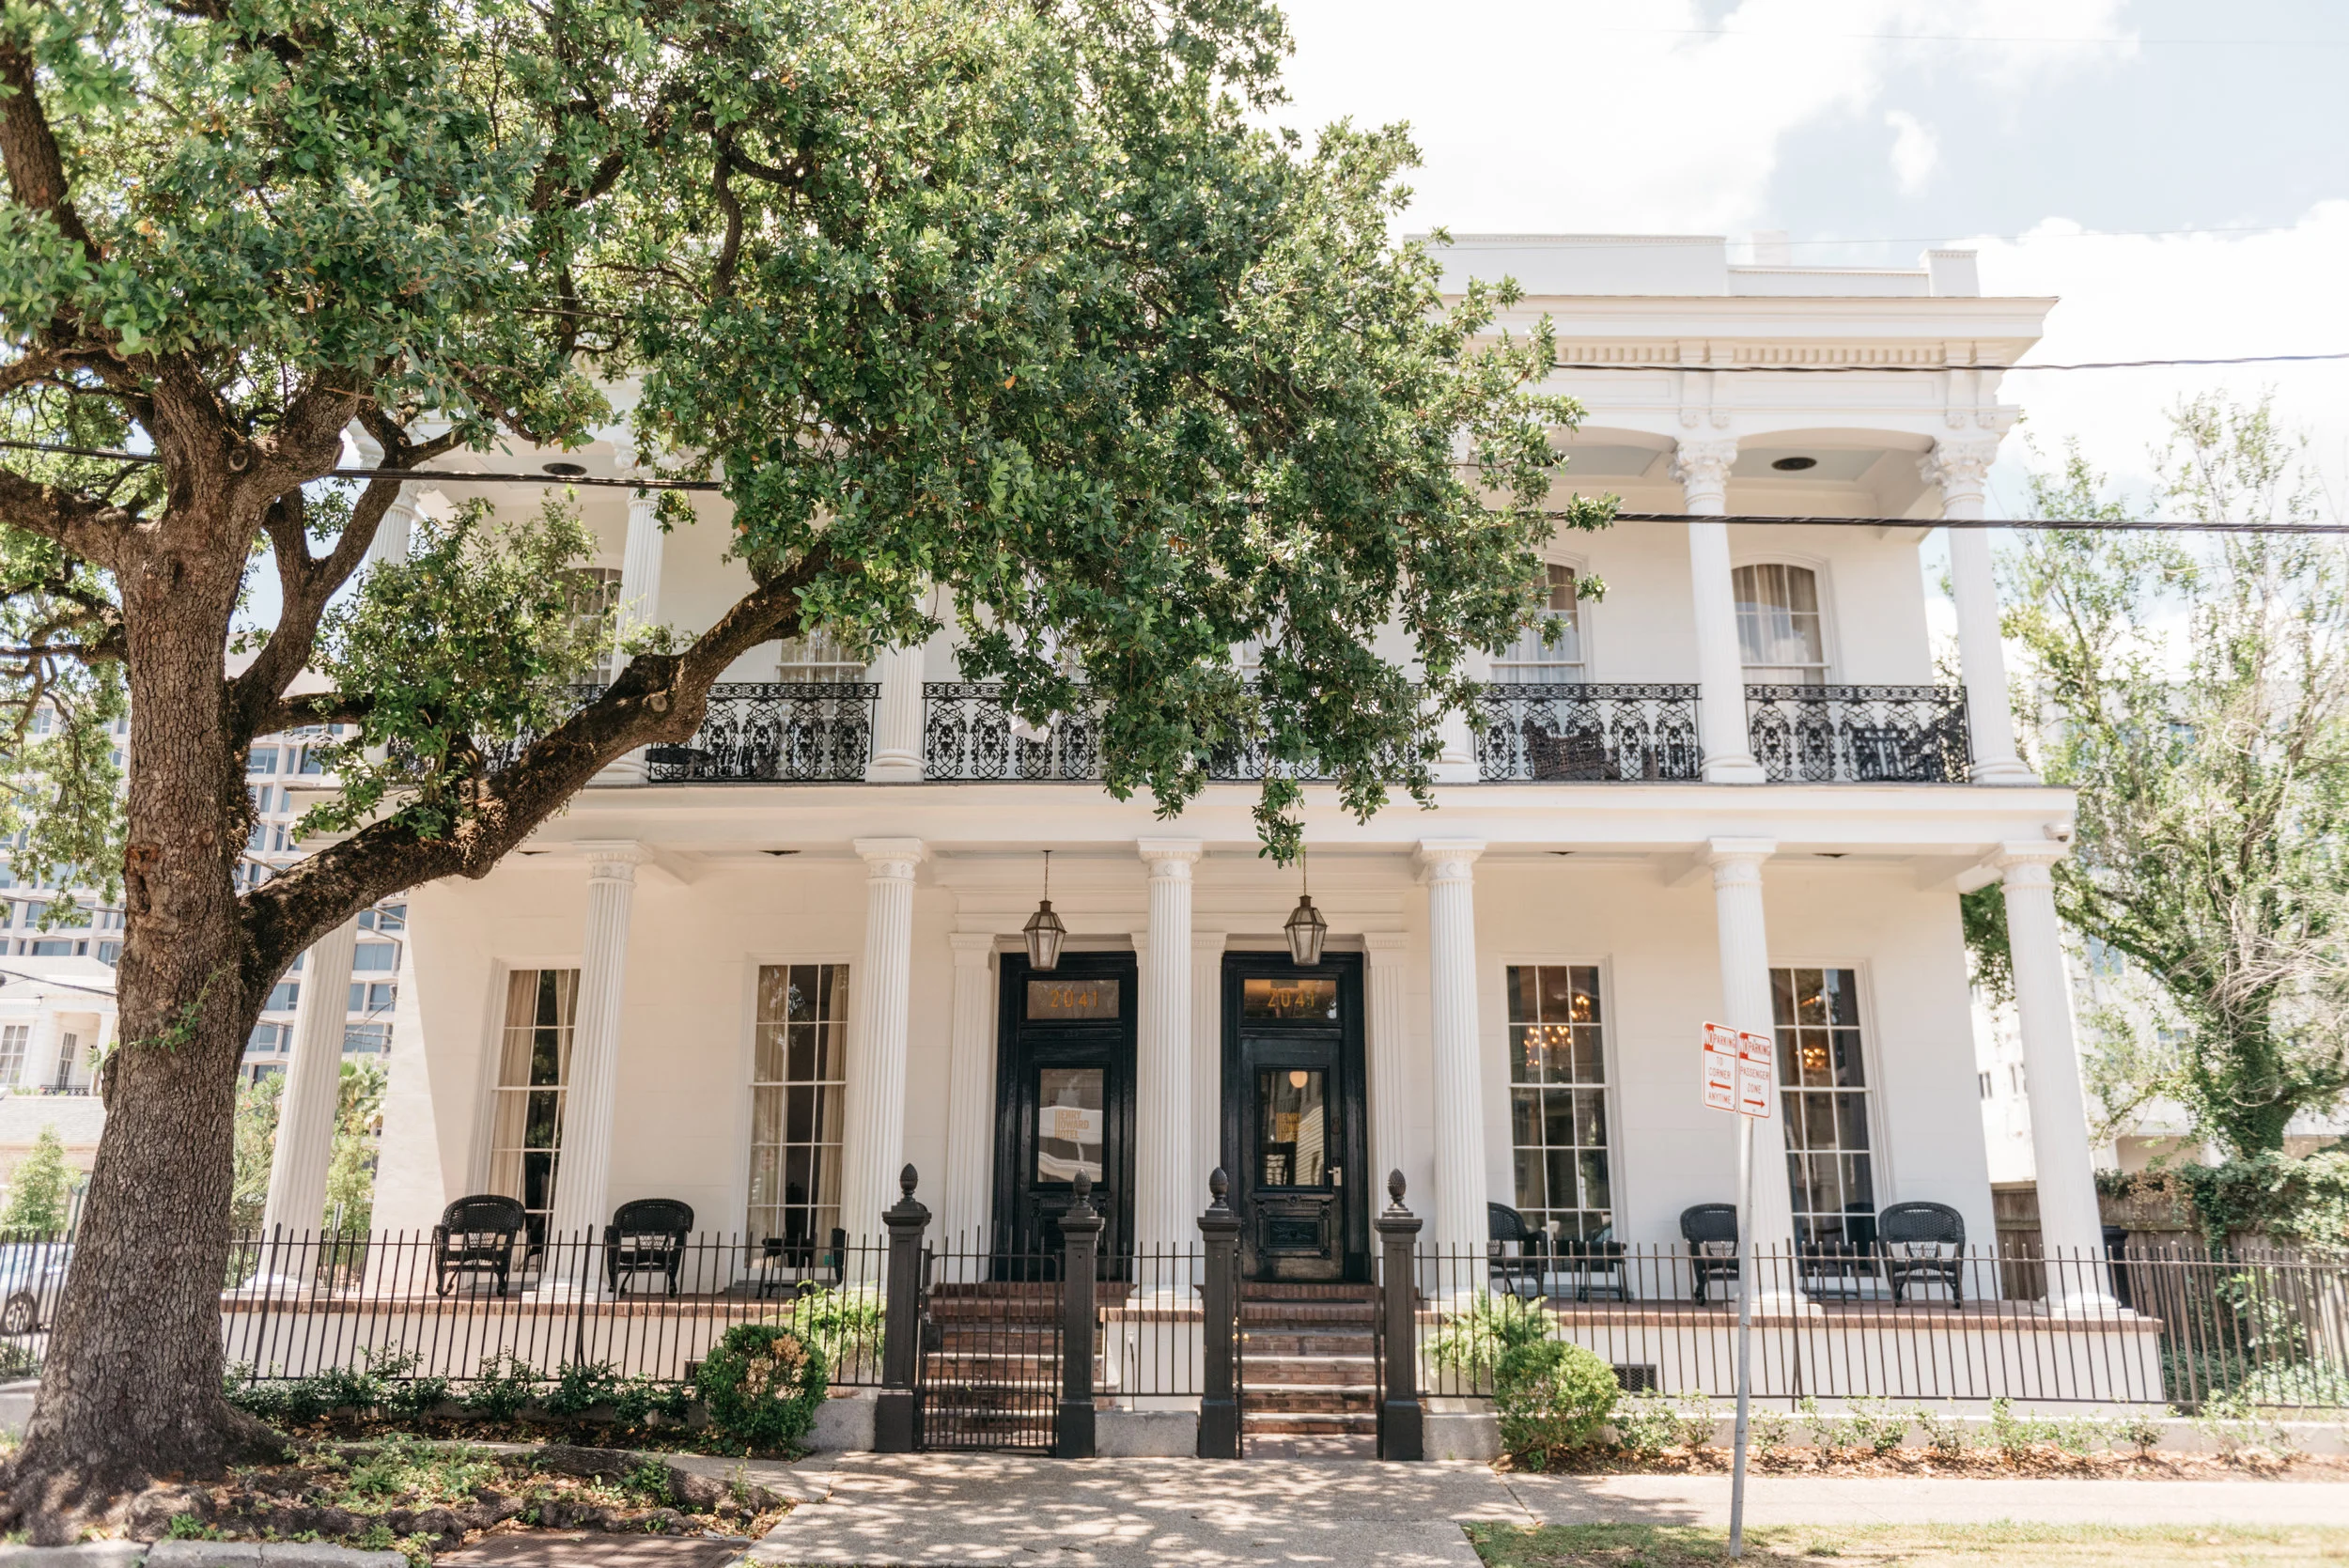 The henry howard hotel, a boutique hotel in new orleans